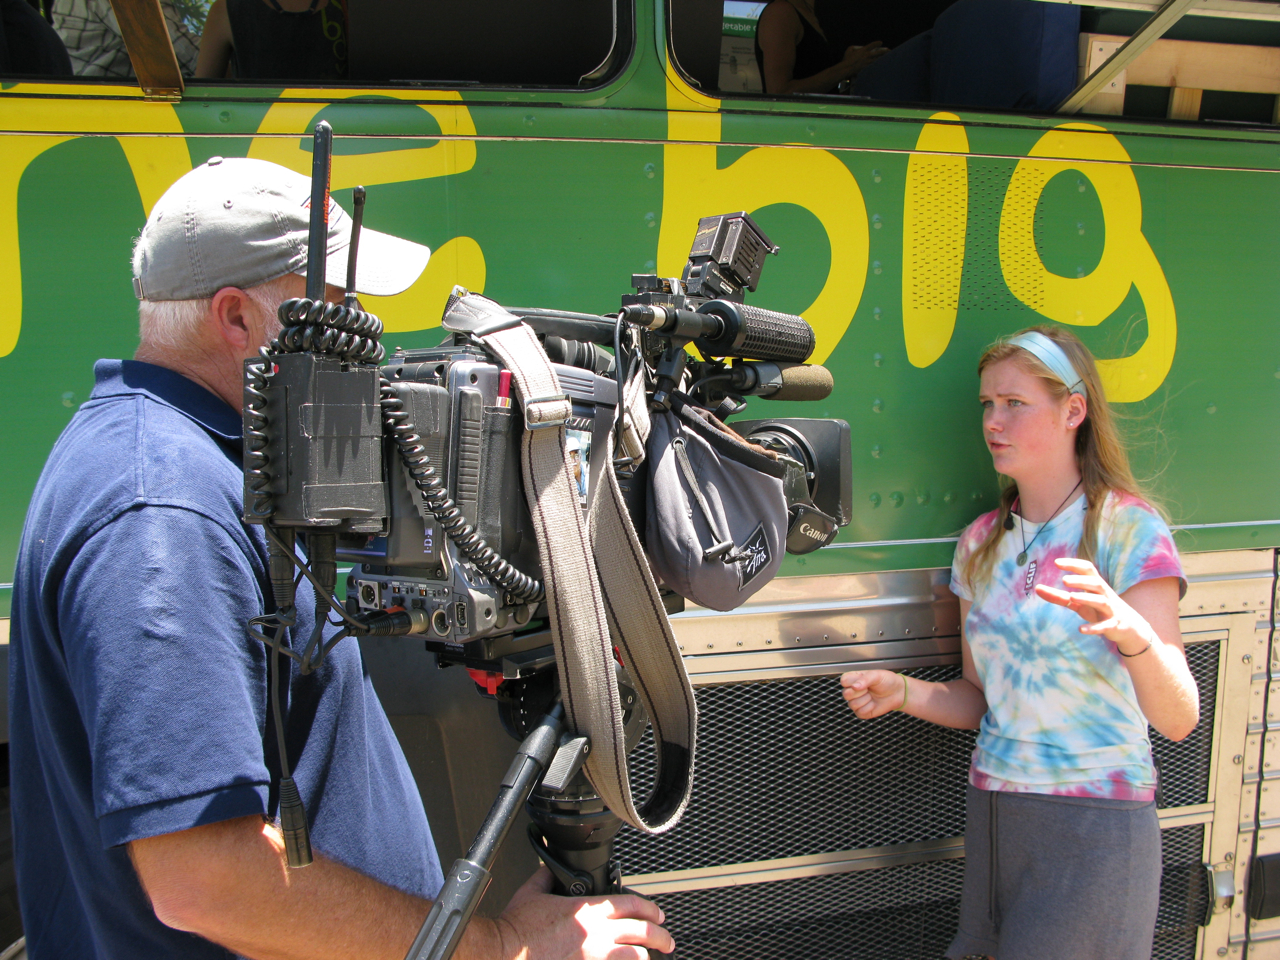 Anna, a Dartmouth sophomore from the Big Green Bus, being interviewed for the local news. The Big Green Bus is greeted by cameras wherever they go.